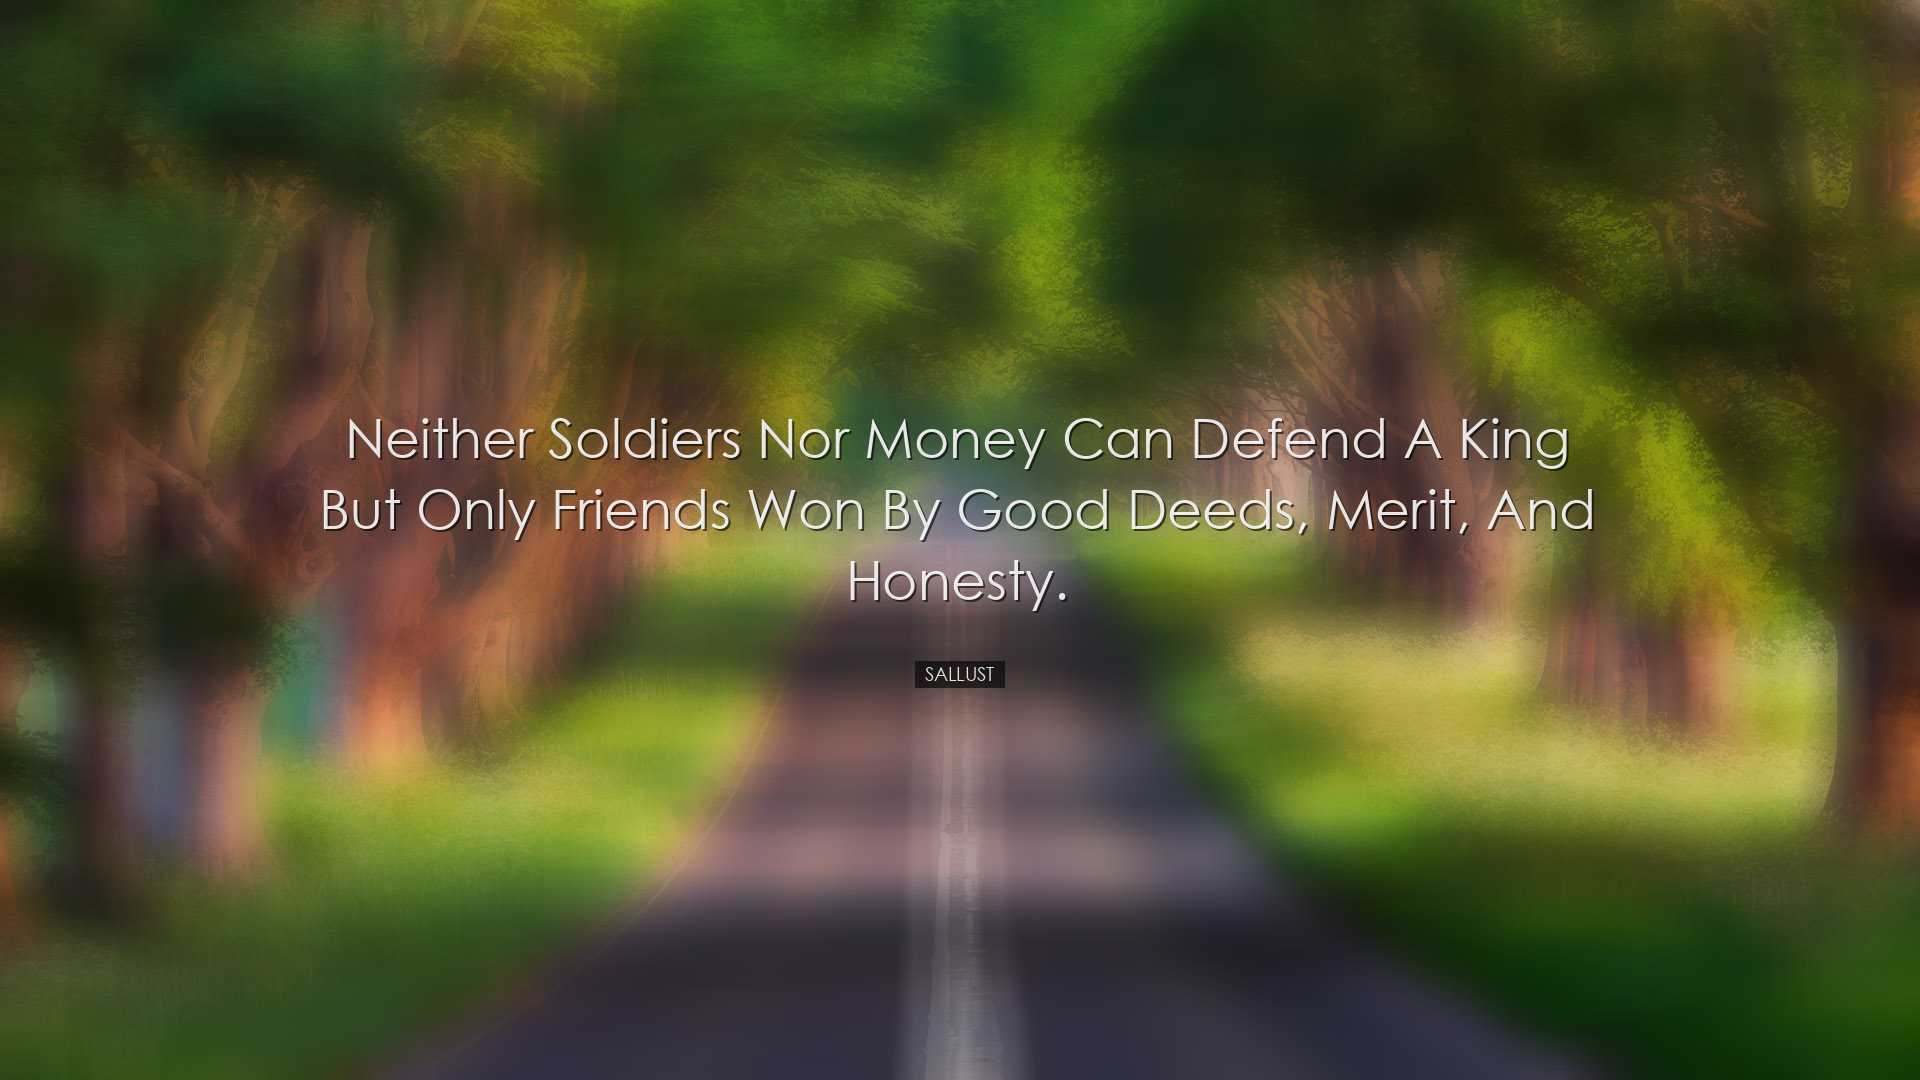 Neither soldiers nor money can defend a king but only friends won